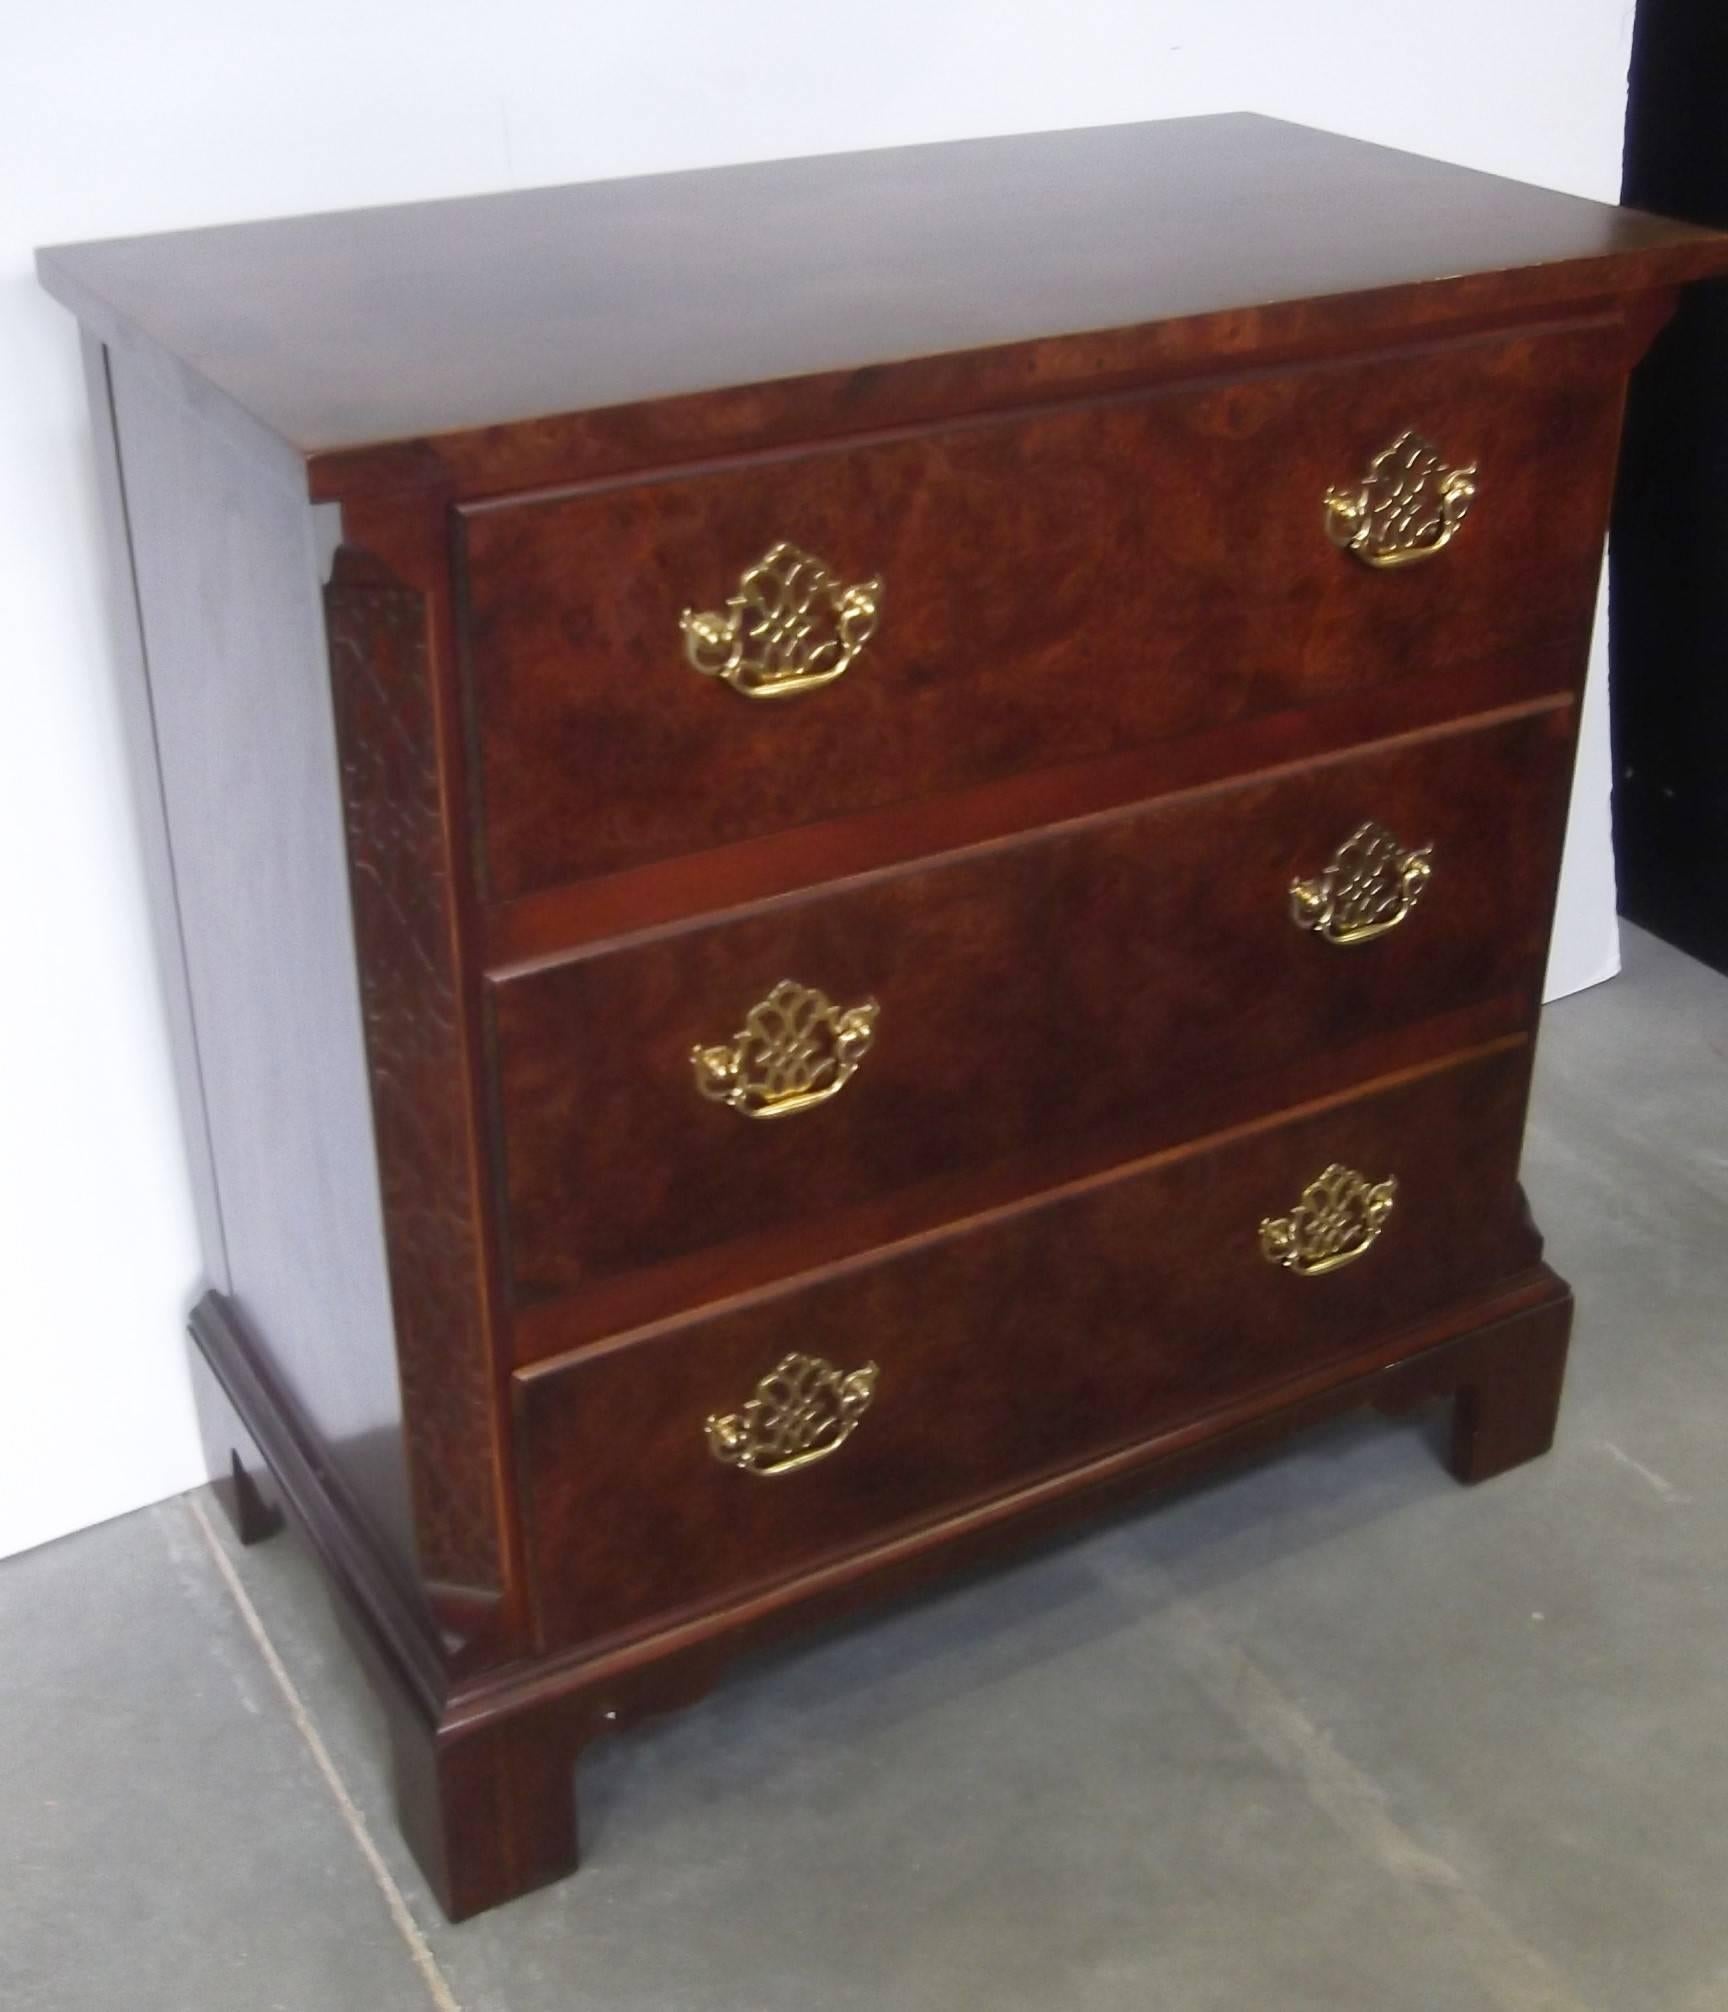 Mahogany Chippendale style three-drawer bachelors chest with pierced shield back drawer pulls. The mahogany case with burl drawer fronts resting on bracket feet. This is a 20th century version made by the premier American maker, Baker furniture.